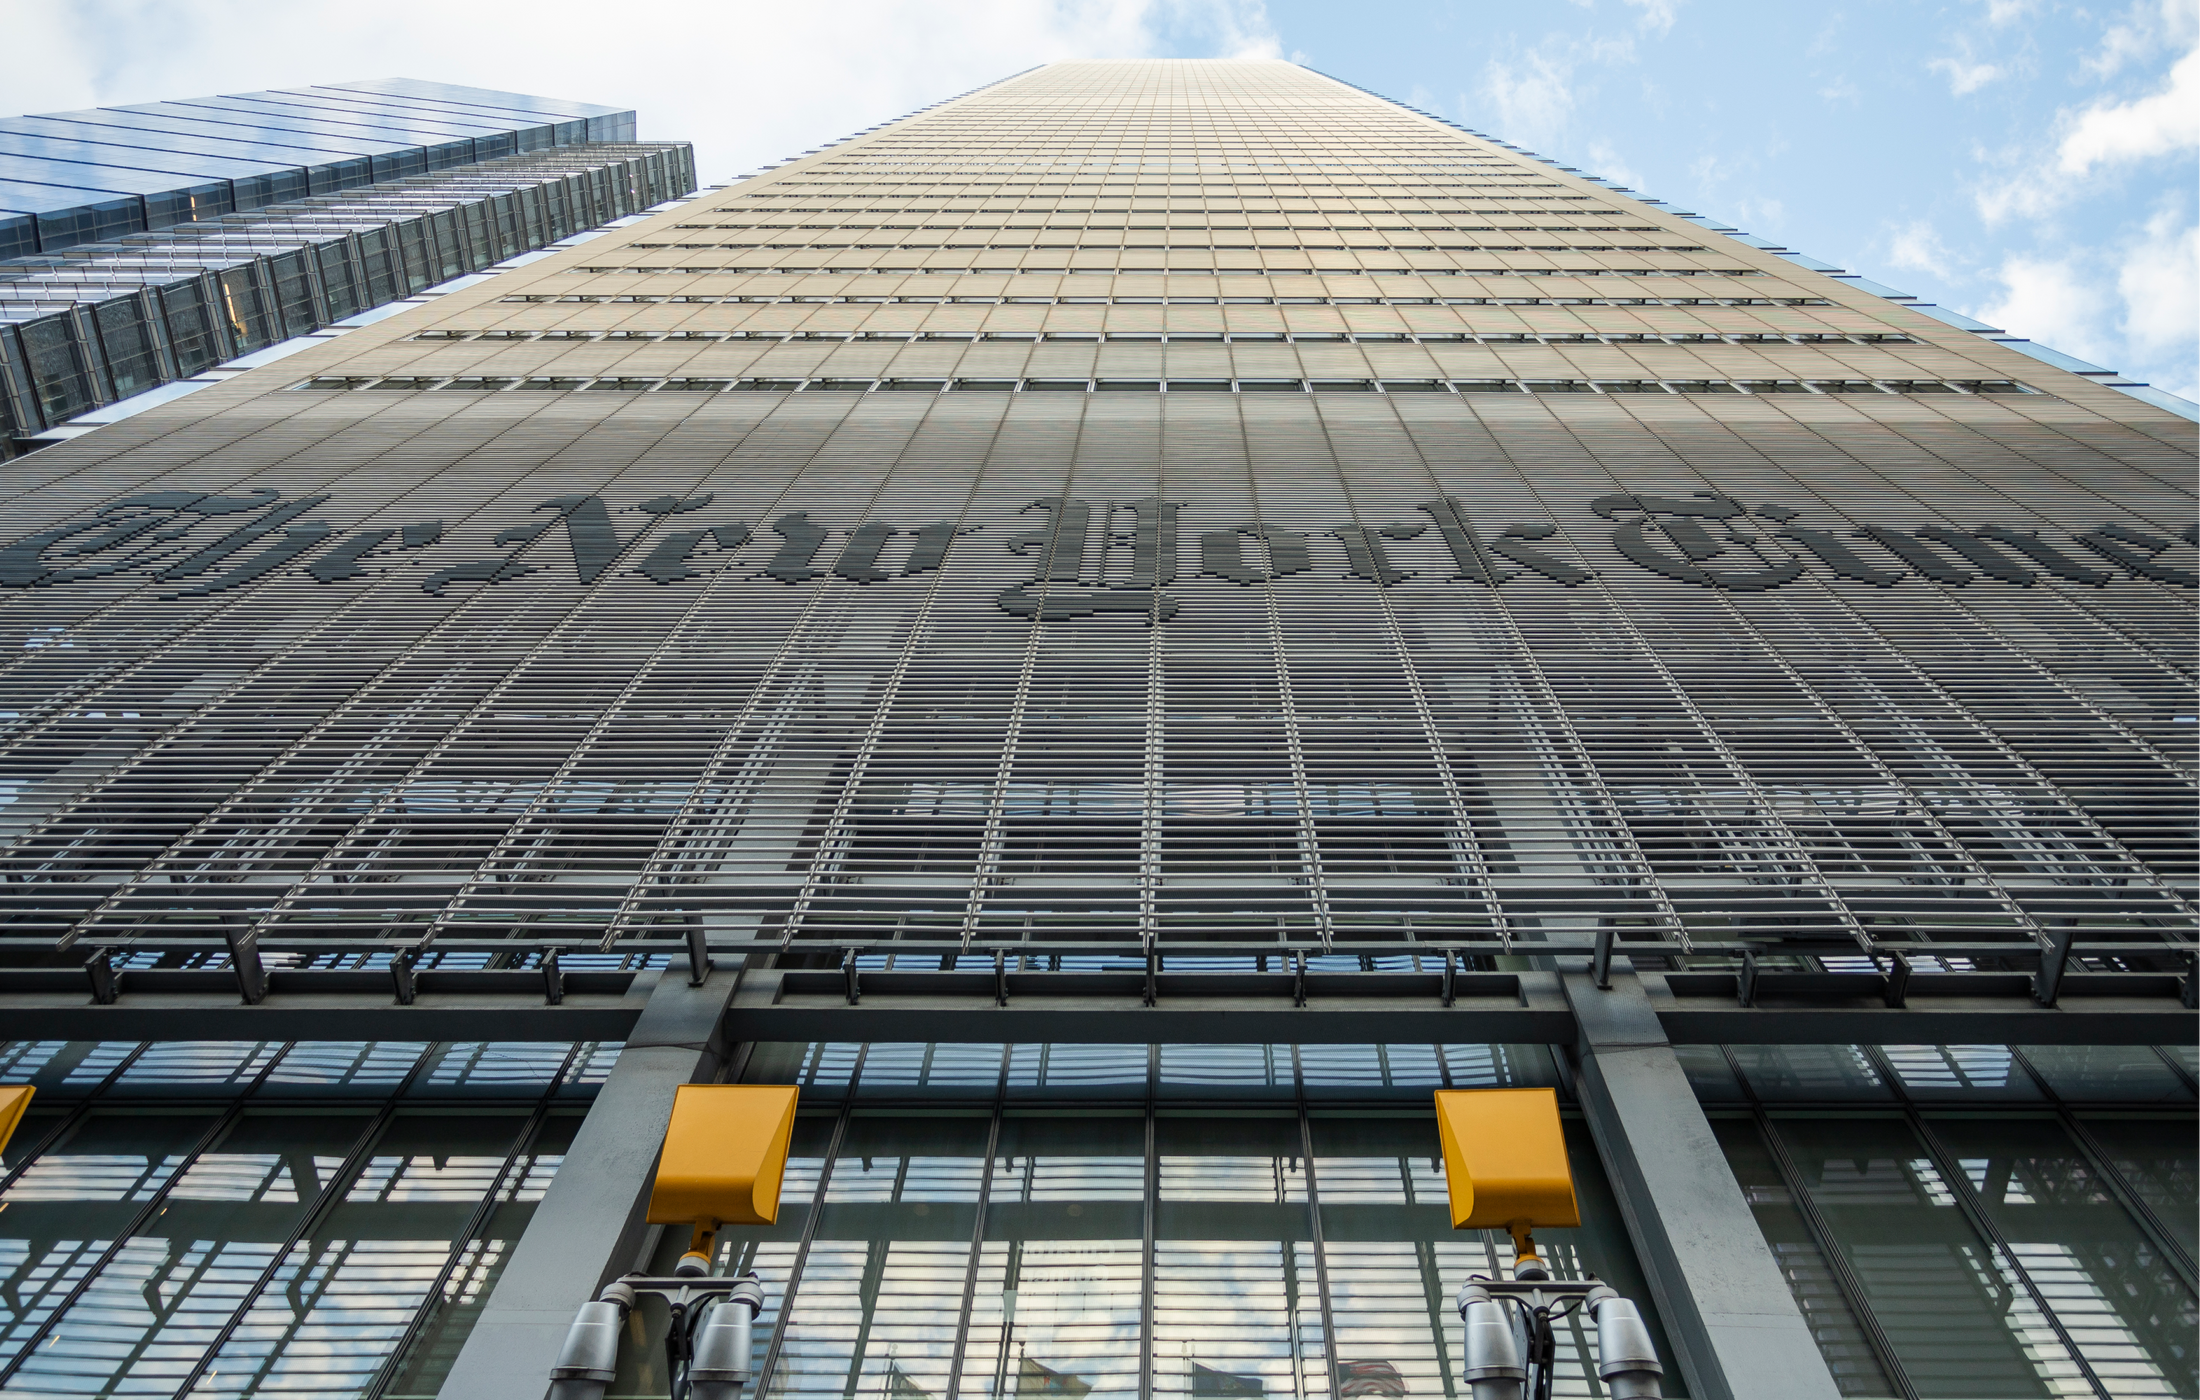 The New York Times expands its street style coverage with new